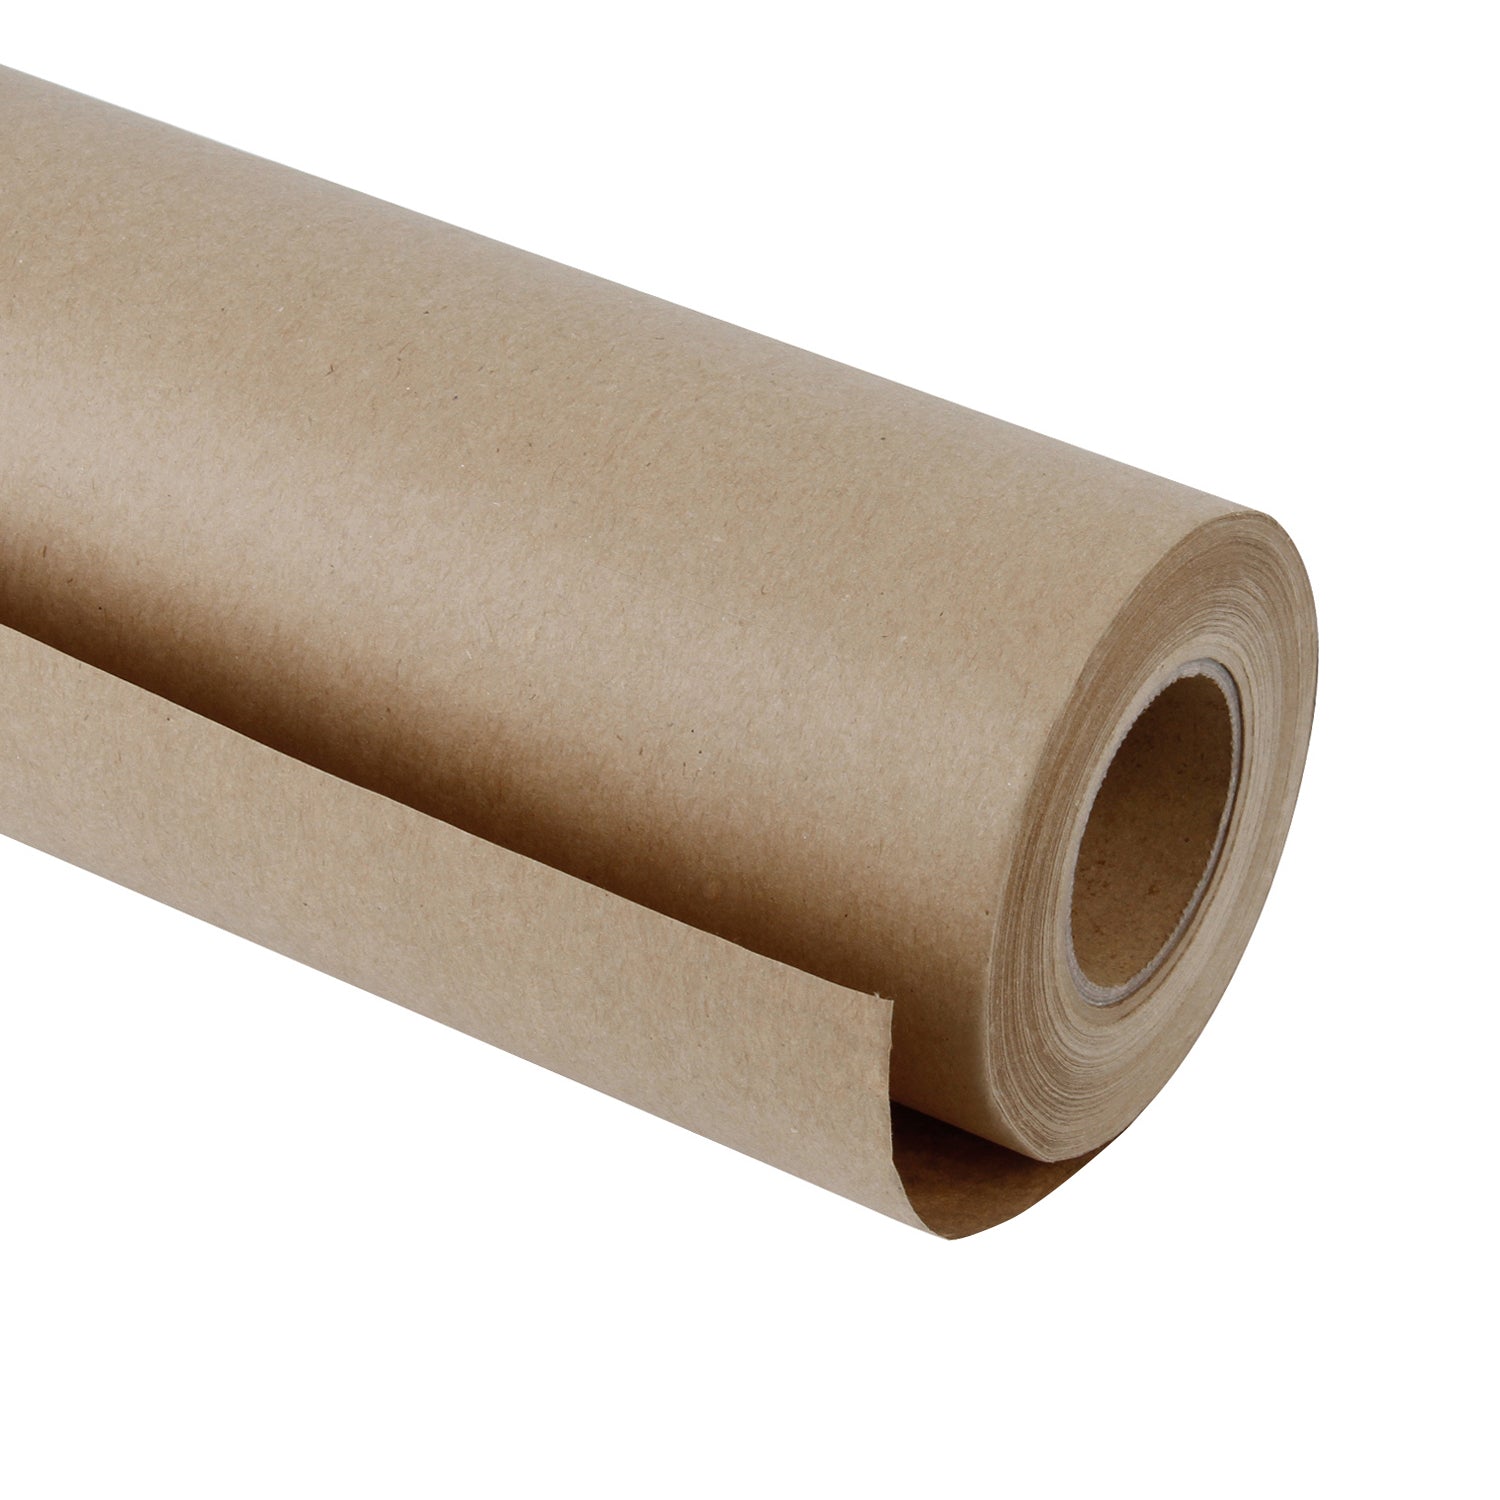 Brown Kraft Paper Roll - 12 inch x 100 Feet - Natural Recycled Paper  Perfect for Crafts, Art, Small Gift Wrapping, Packing, Postal, Shipping,  Dunnage